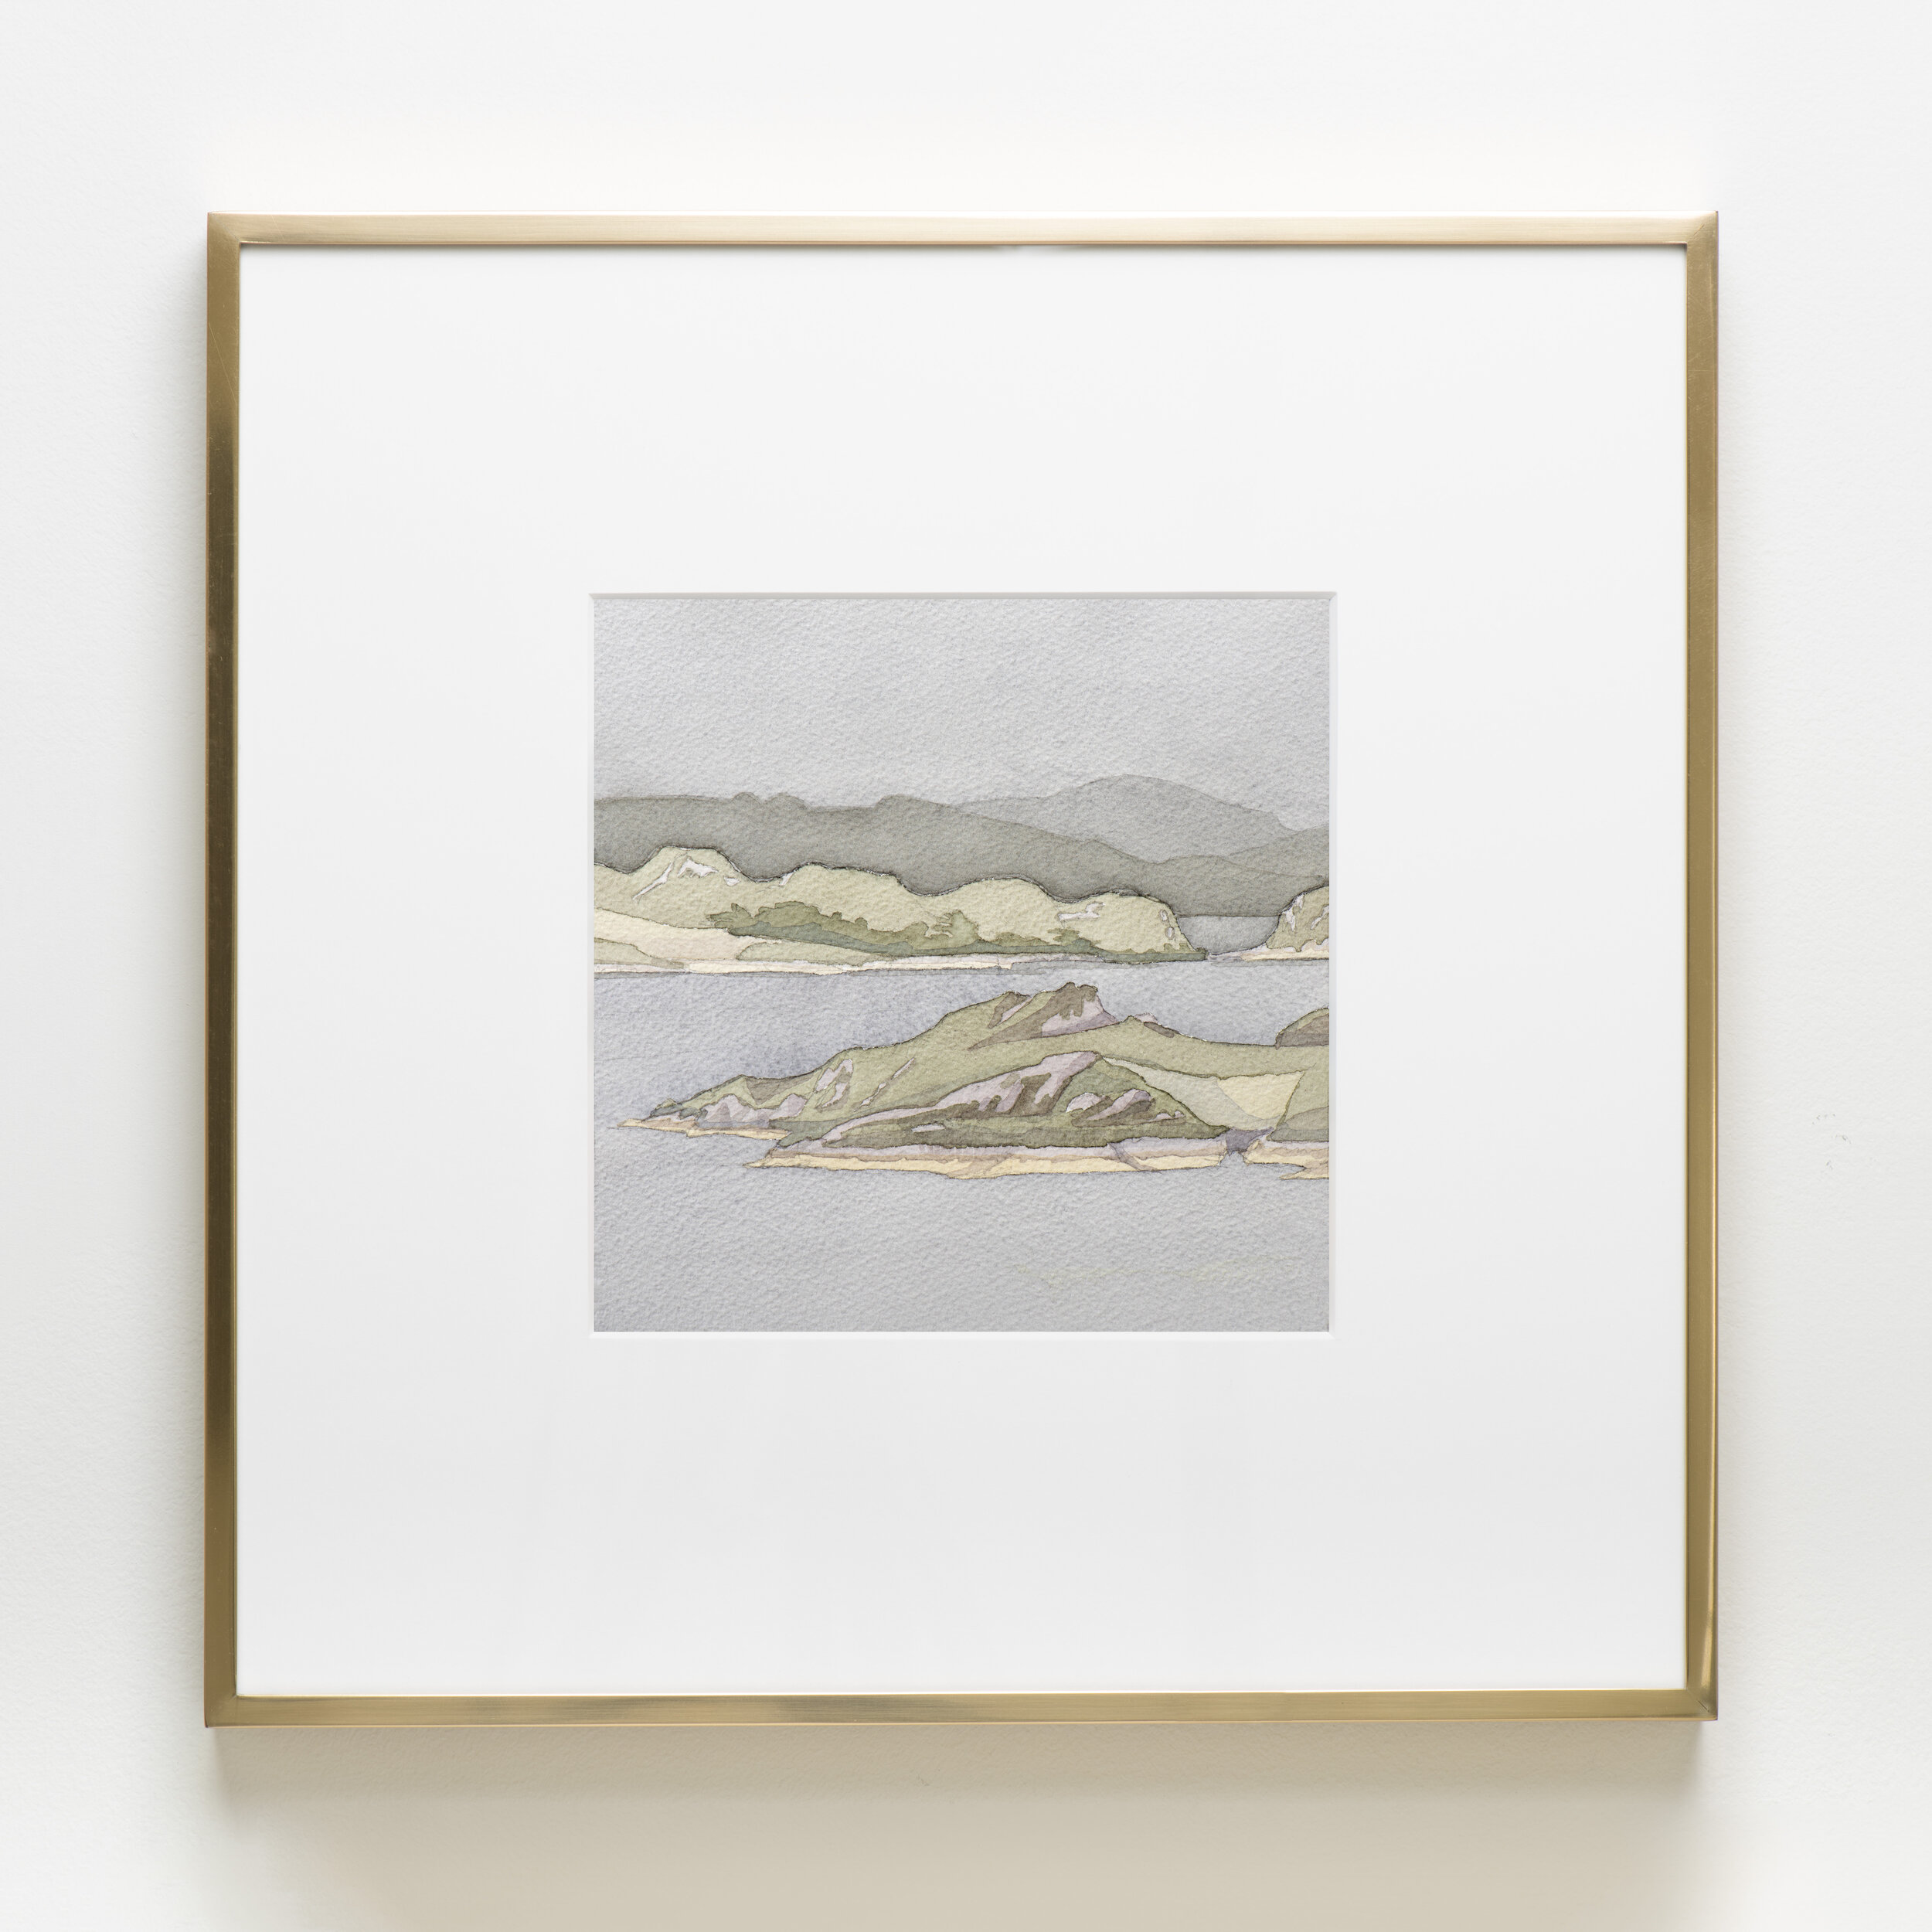   Loch Toridon , 2019 Watercolor on paper 16 1/4 x 16 1/4 inches (framed) 